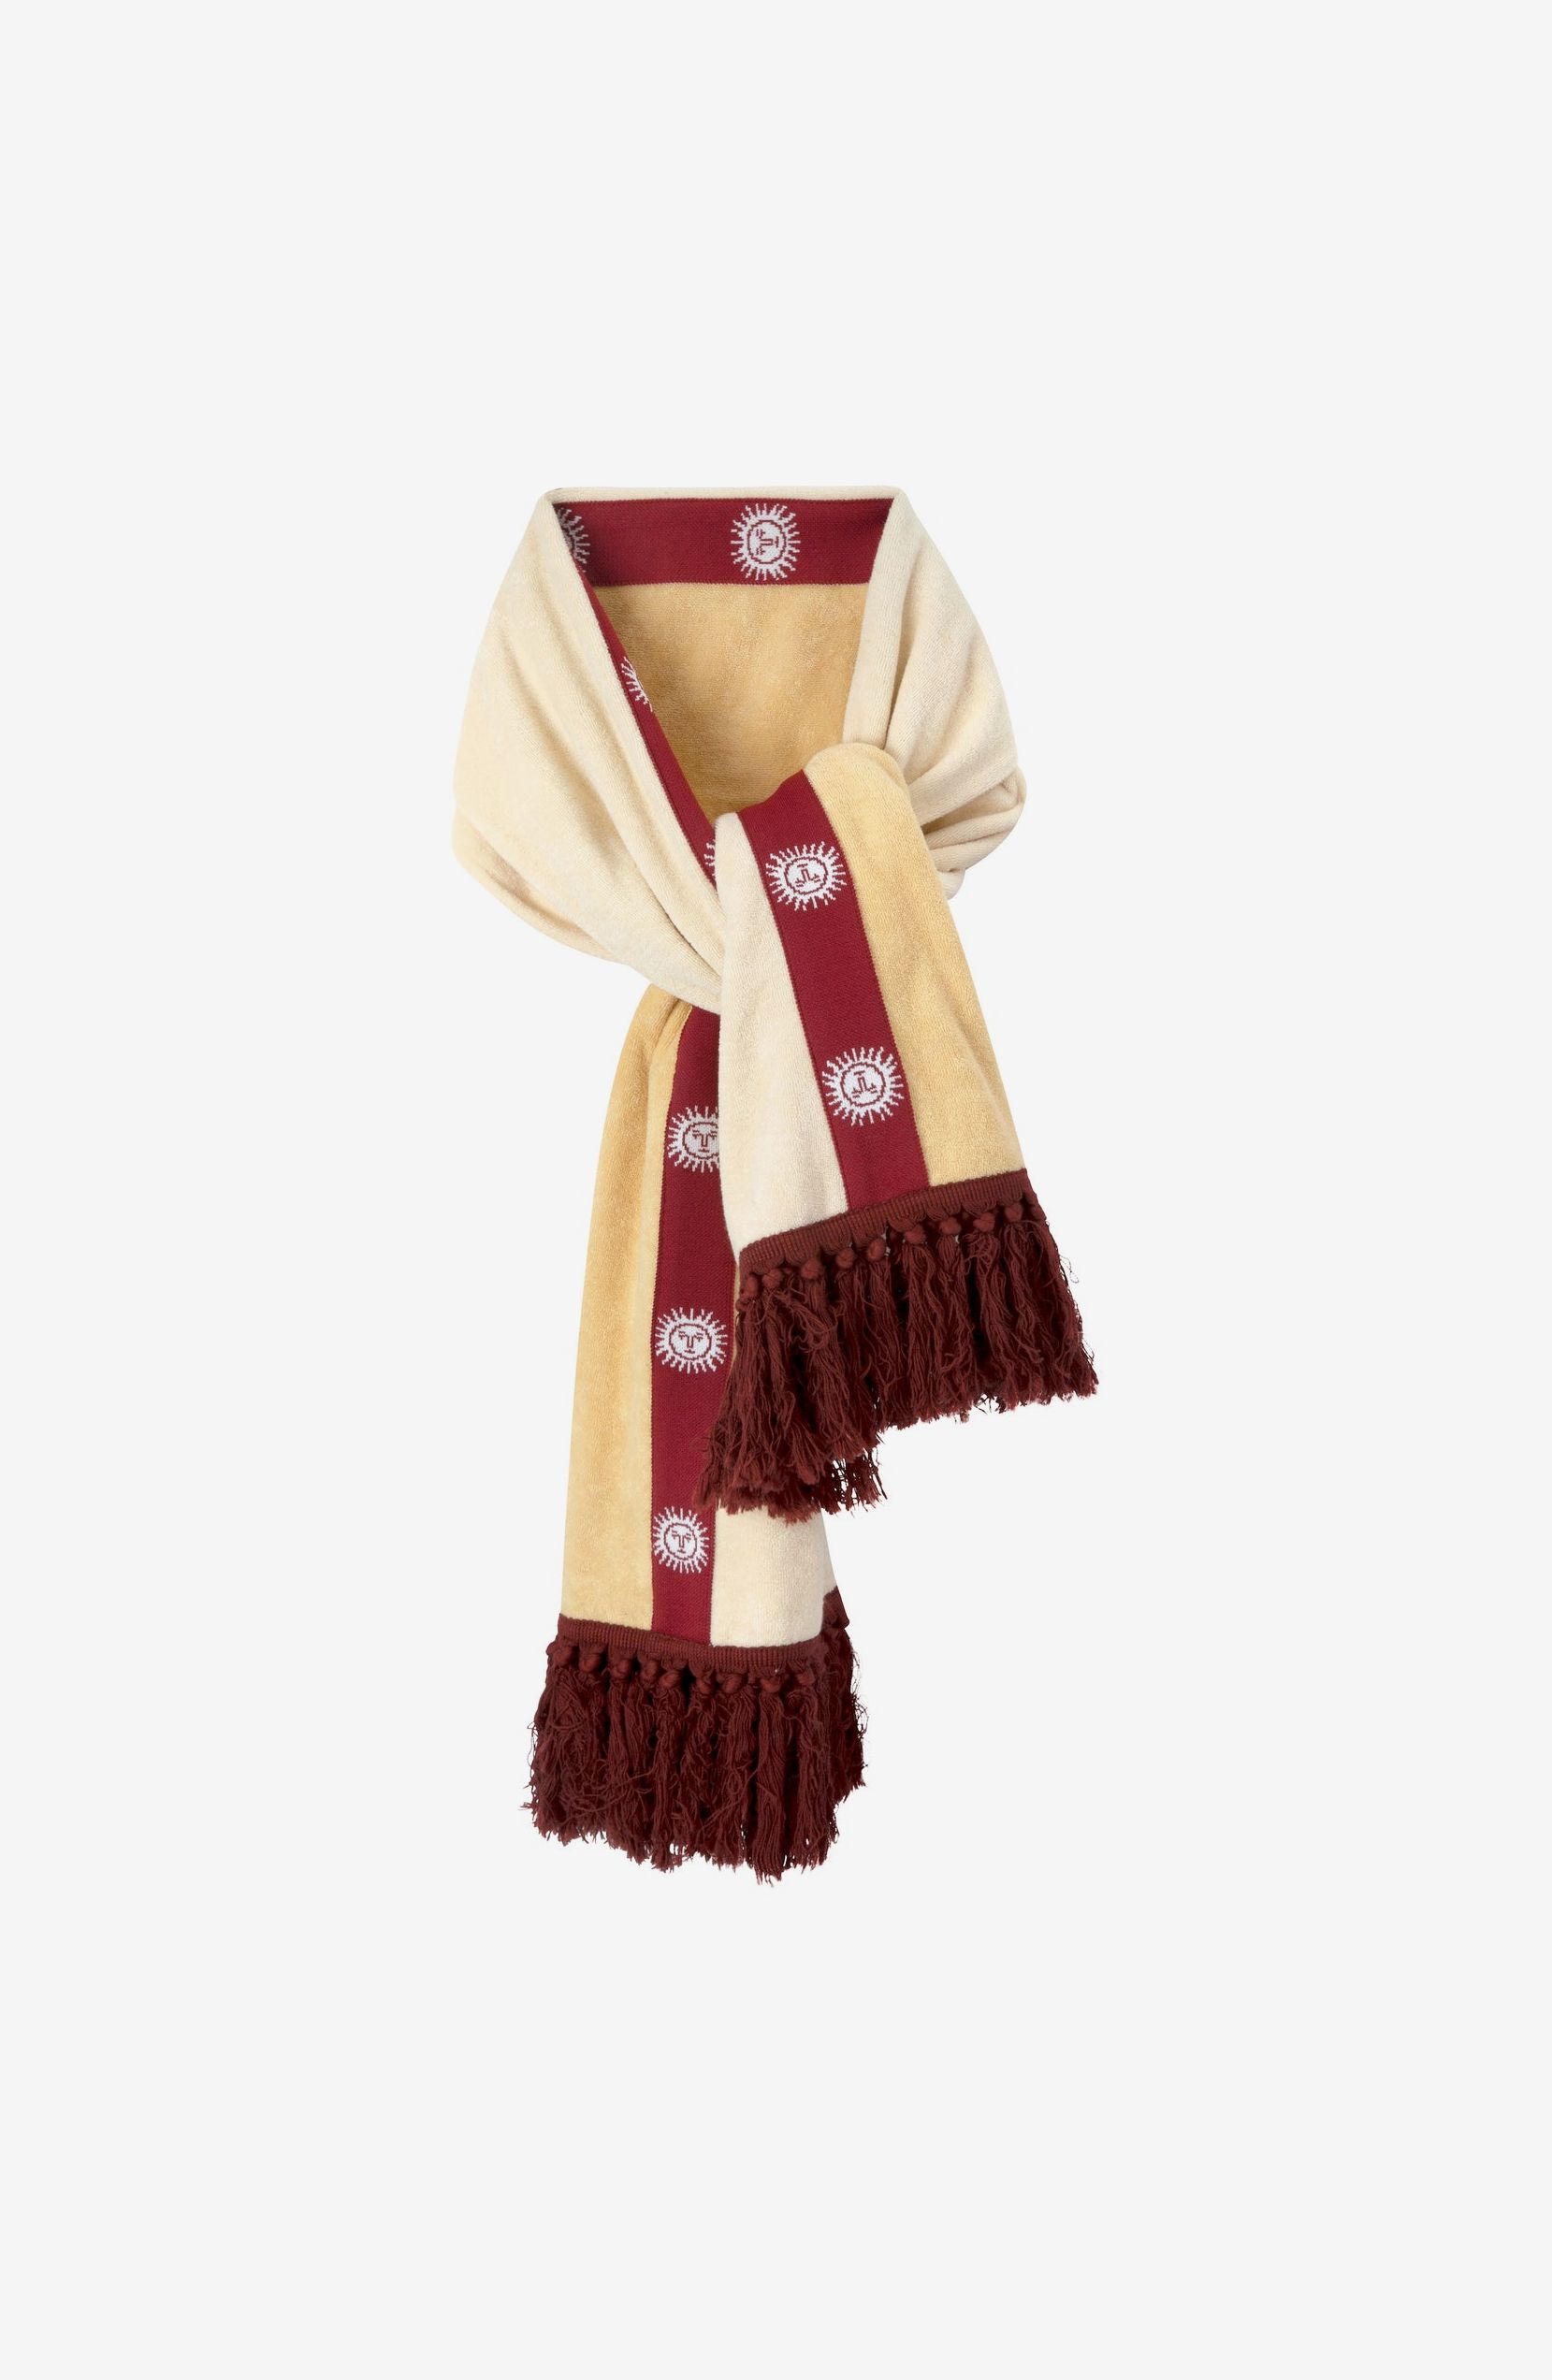 I didn't really love any of the Women's scarves so I bought a